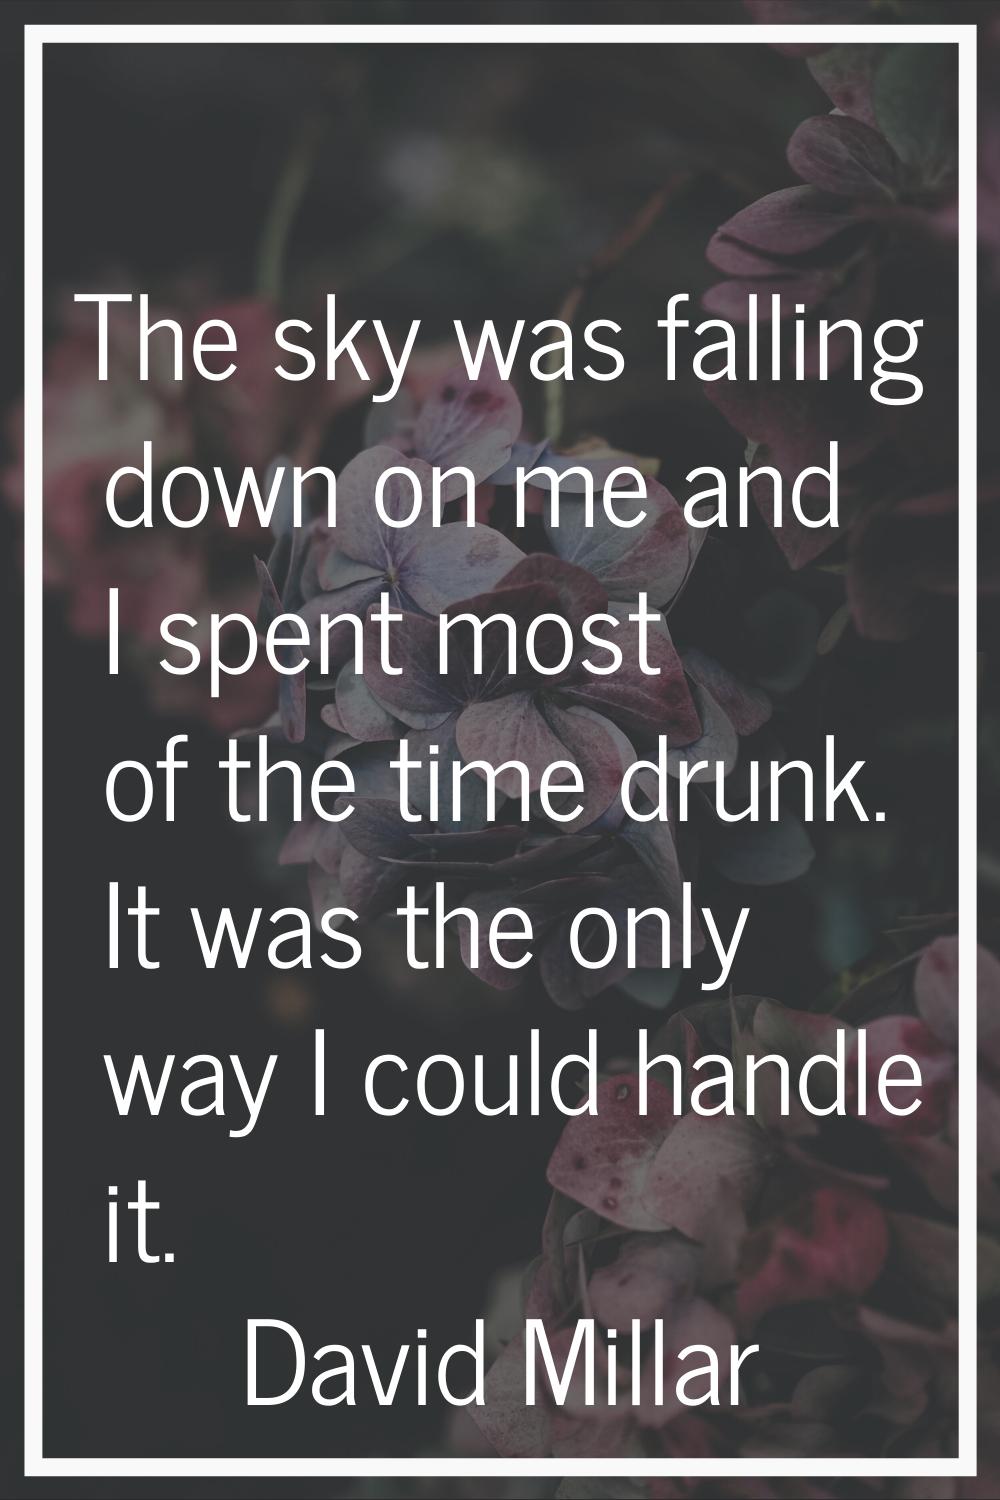 The sky was falling down on me and I spent most of the time drunk. It was the only way I could hand